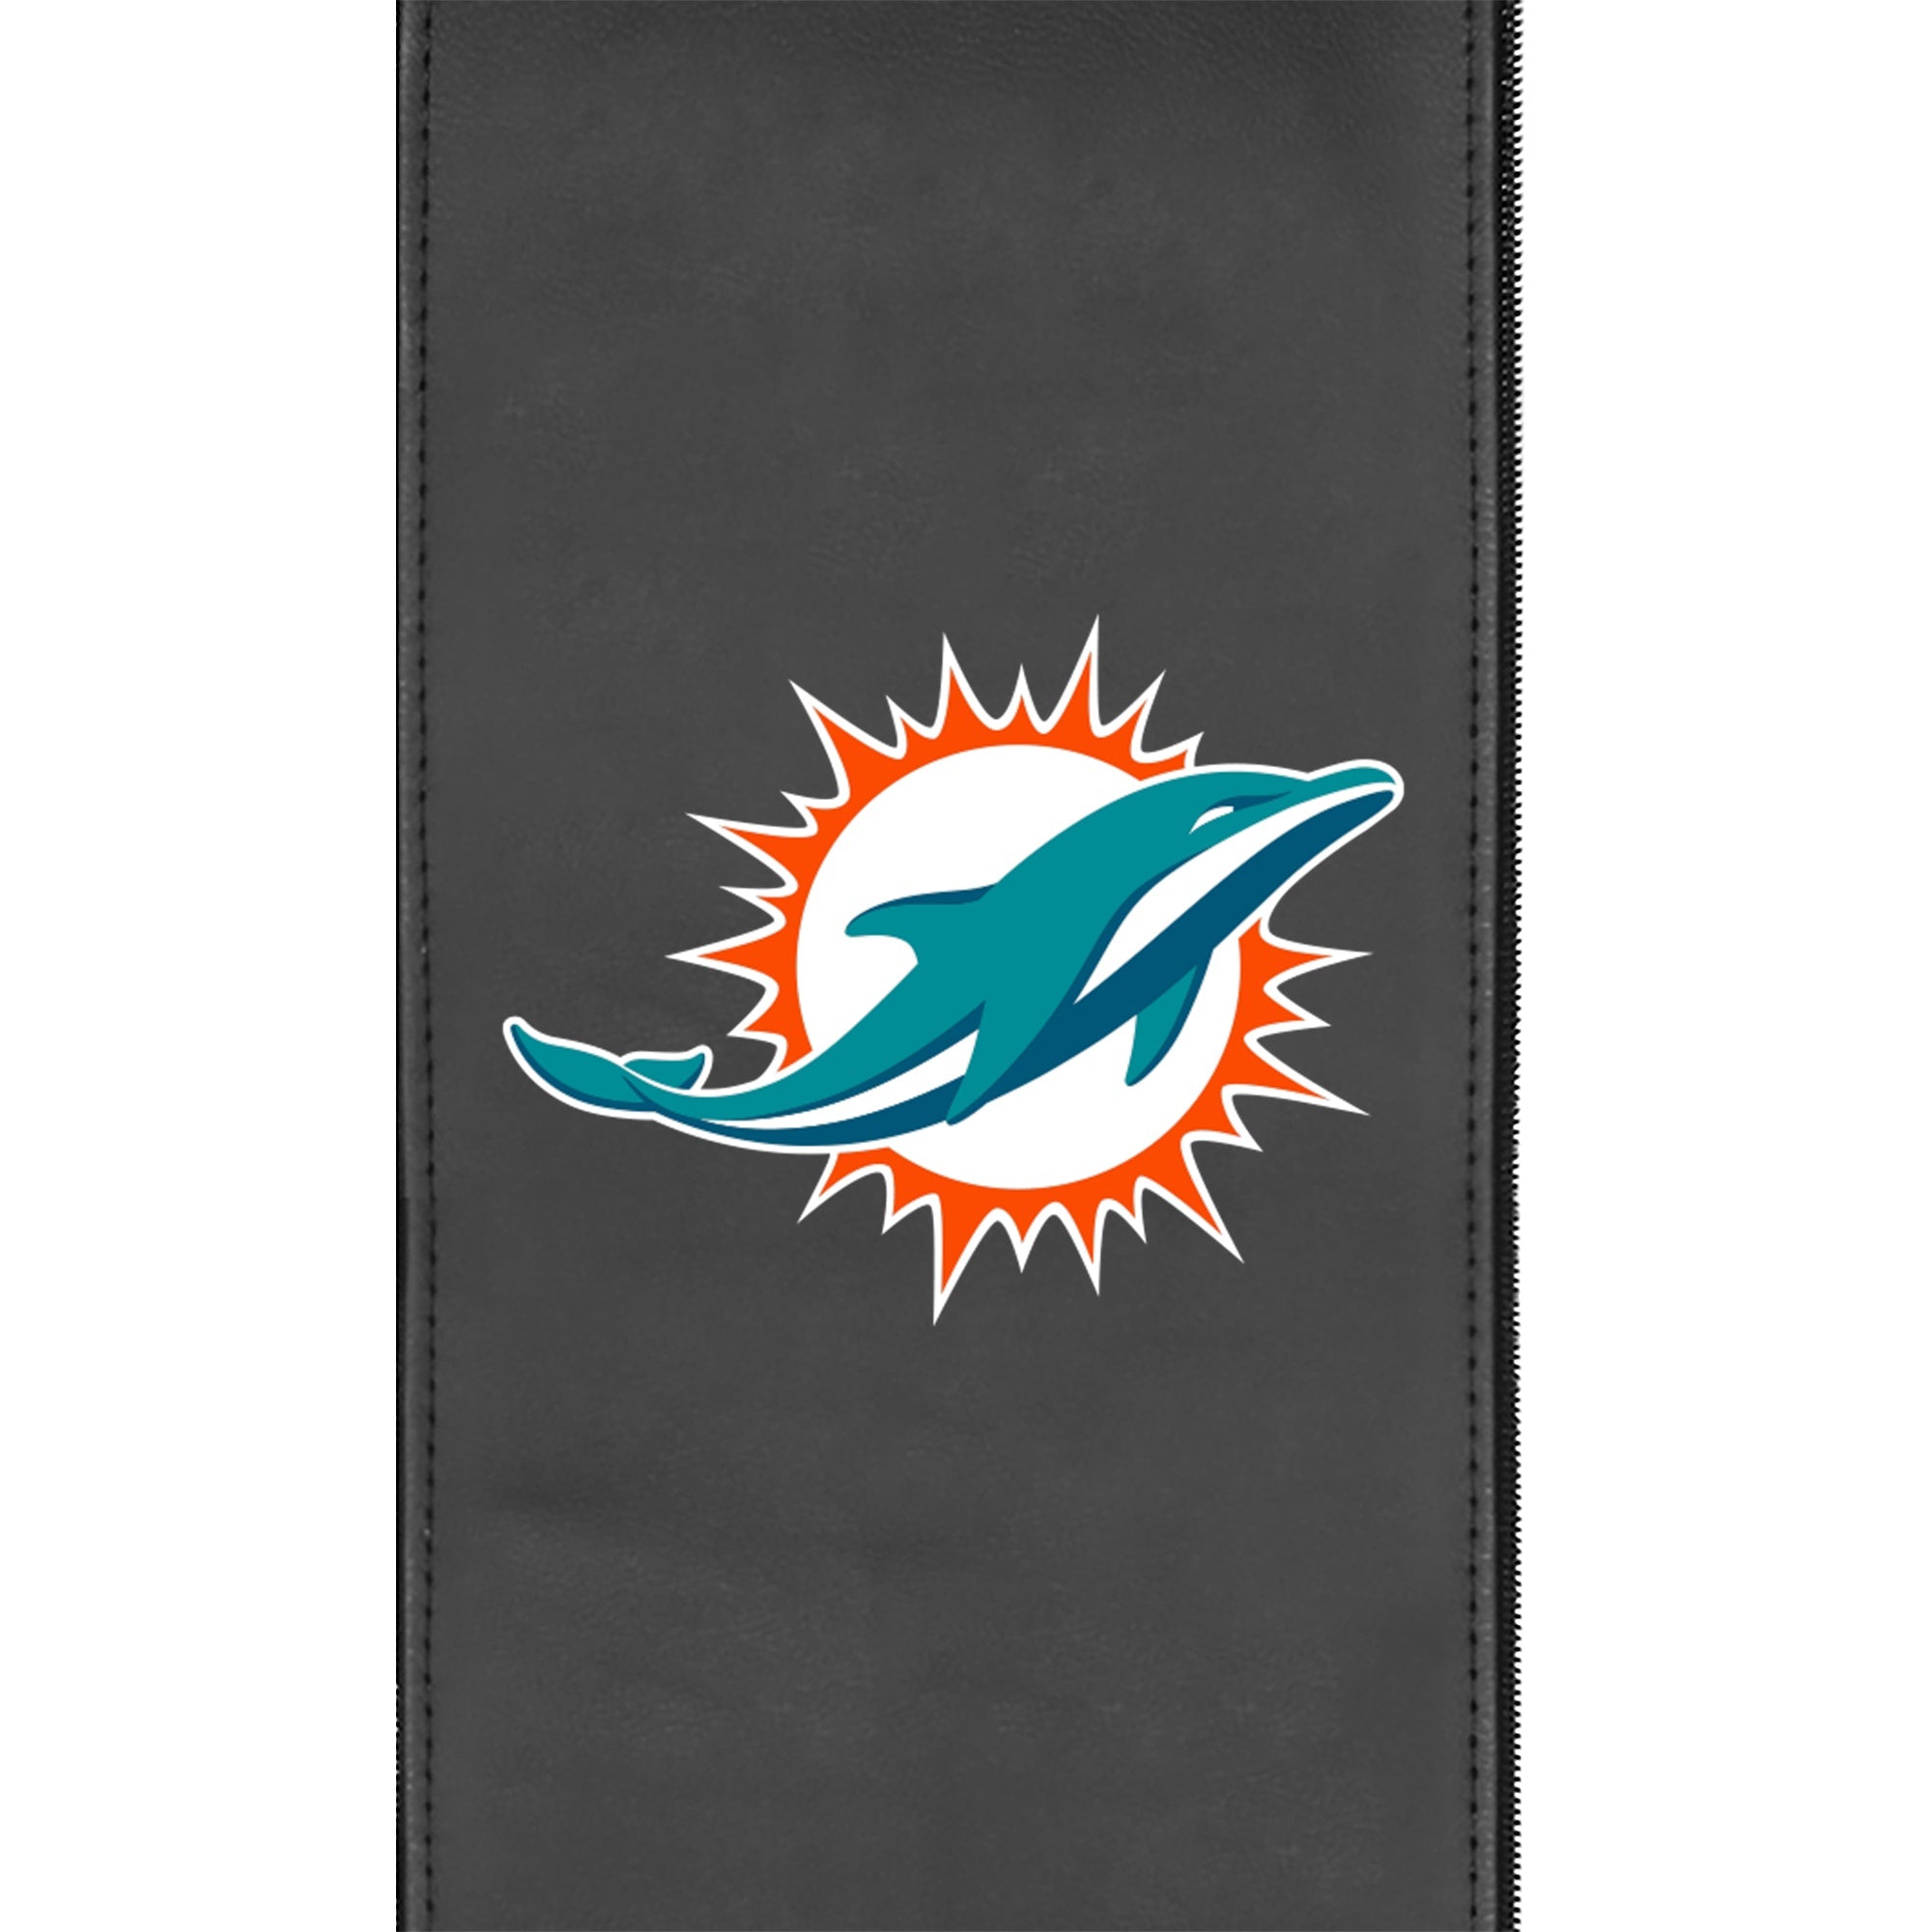 Side Chair 2000 with  Miami Dolphins Primary Logo Set of 2